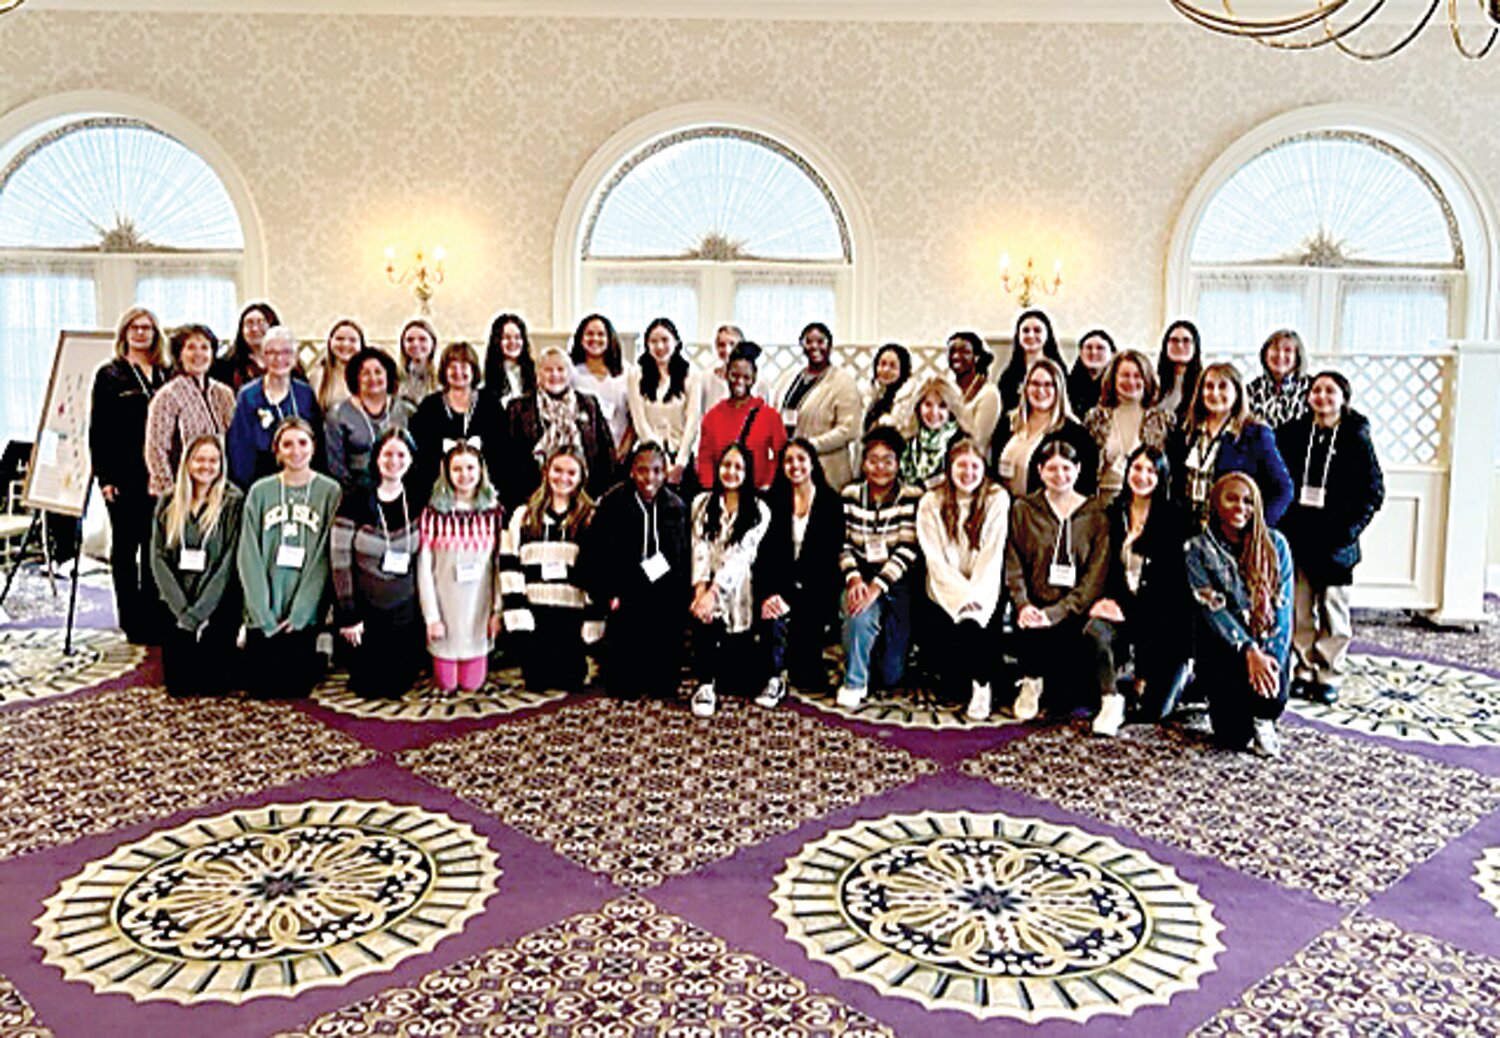 More than 40 local high school age girls registered for the Soroptimist International of Indian Rock career conference that was facilitated by 13 members and volunteers and supported by 16 professional women (not shown) who shared their career stories and offered guidance.